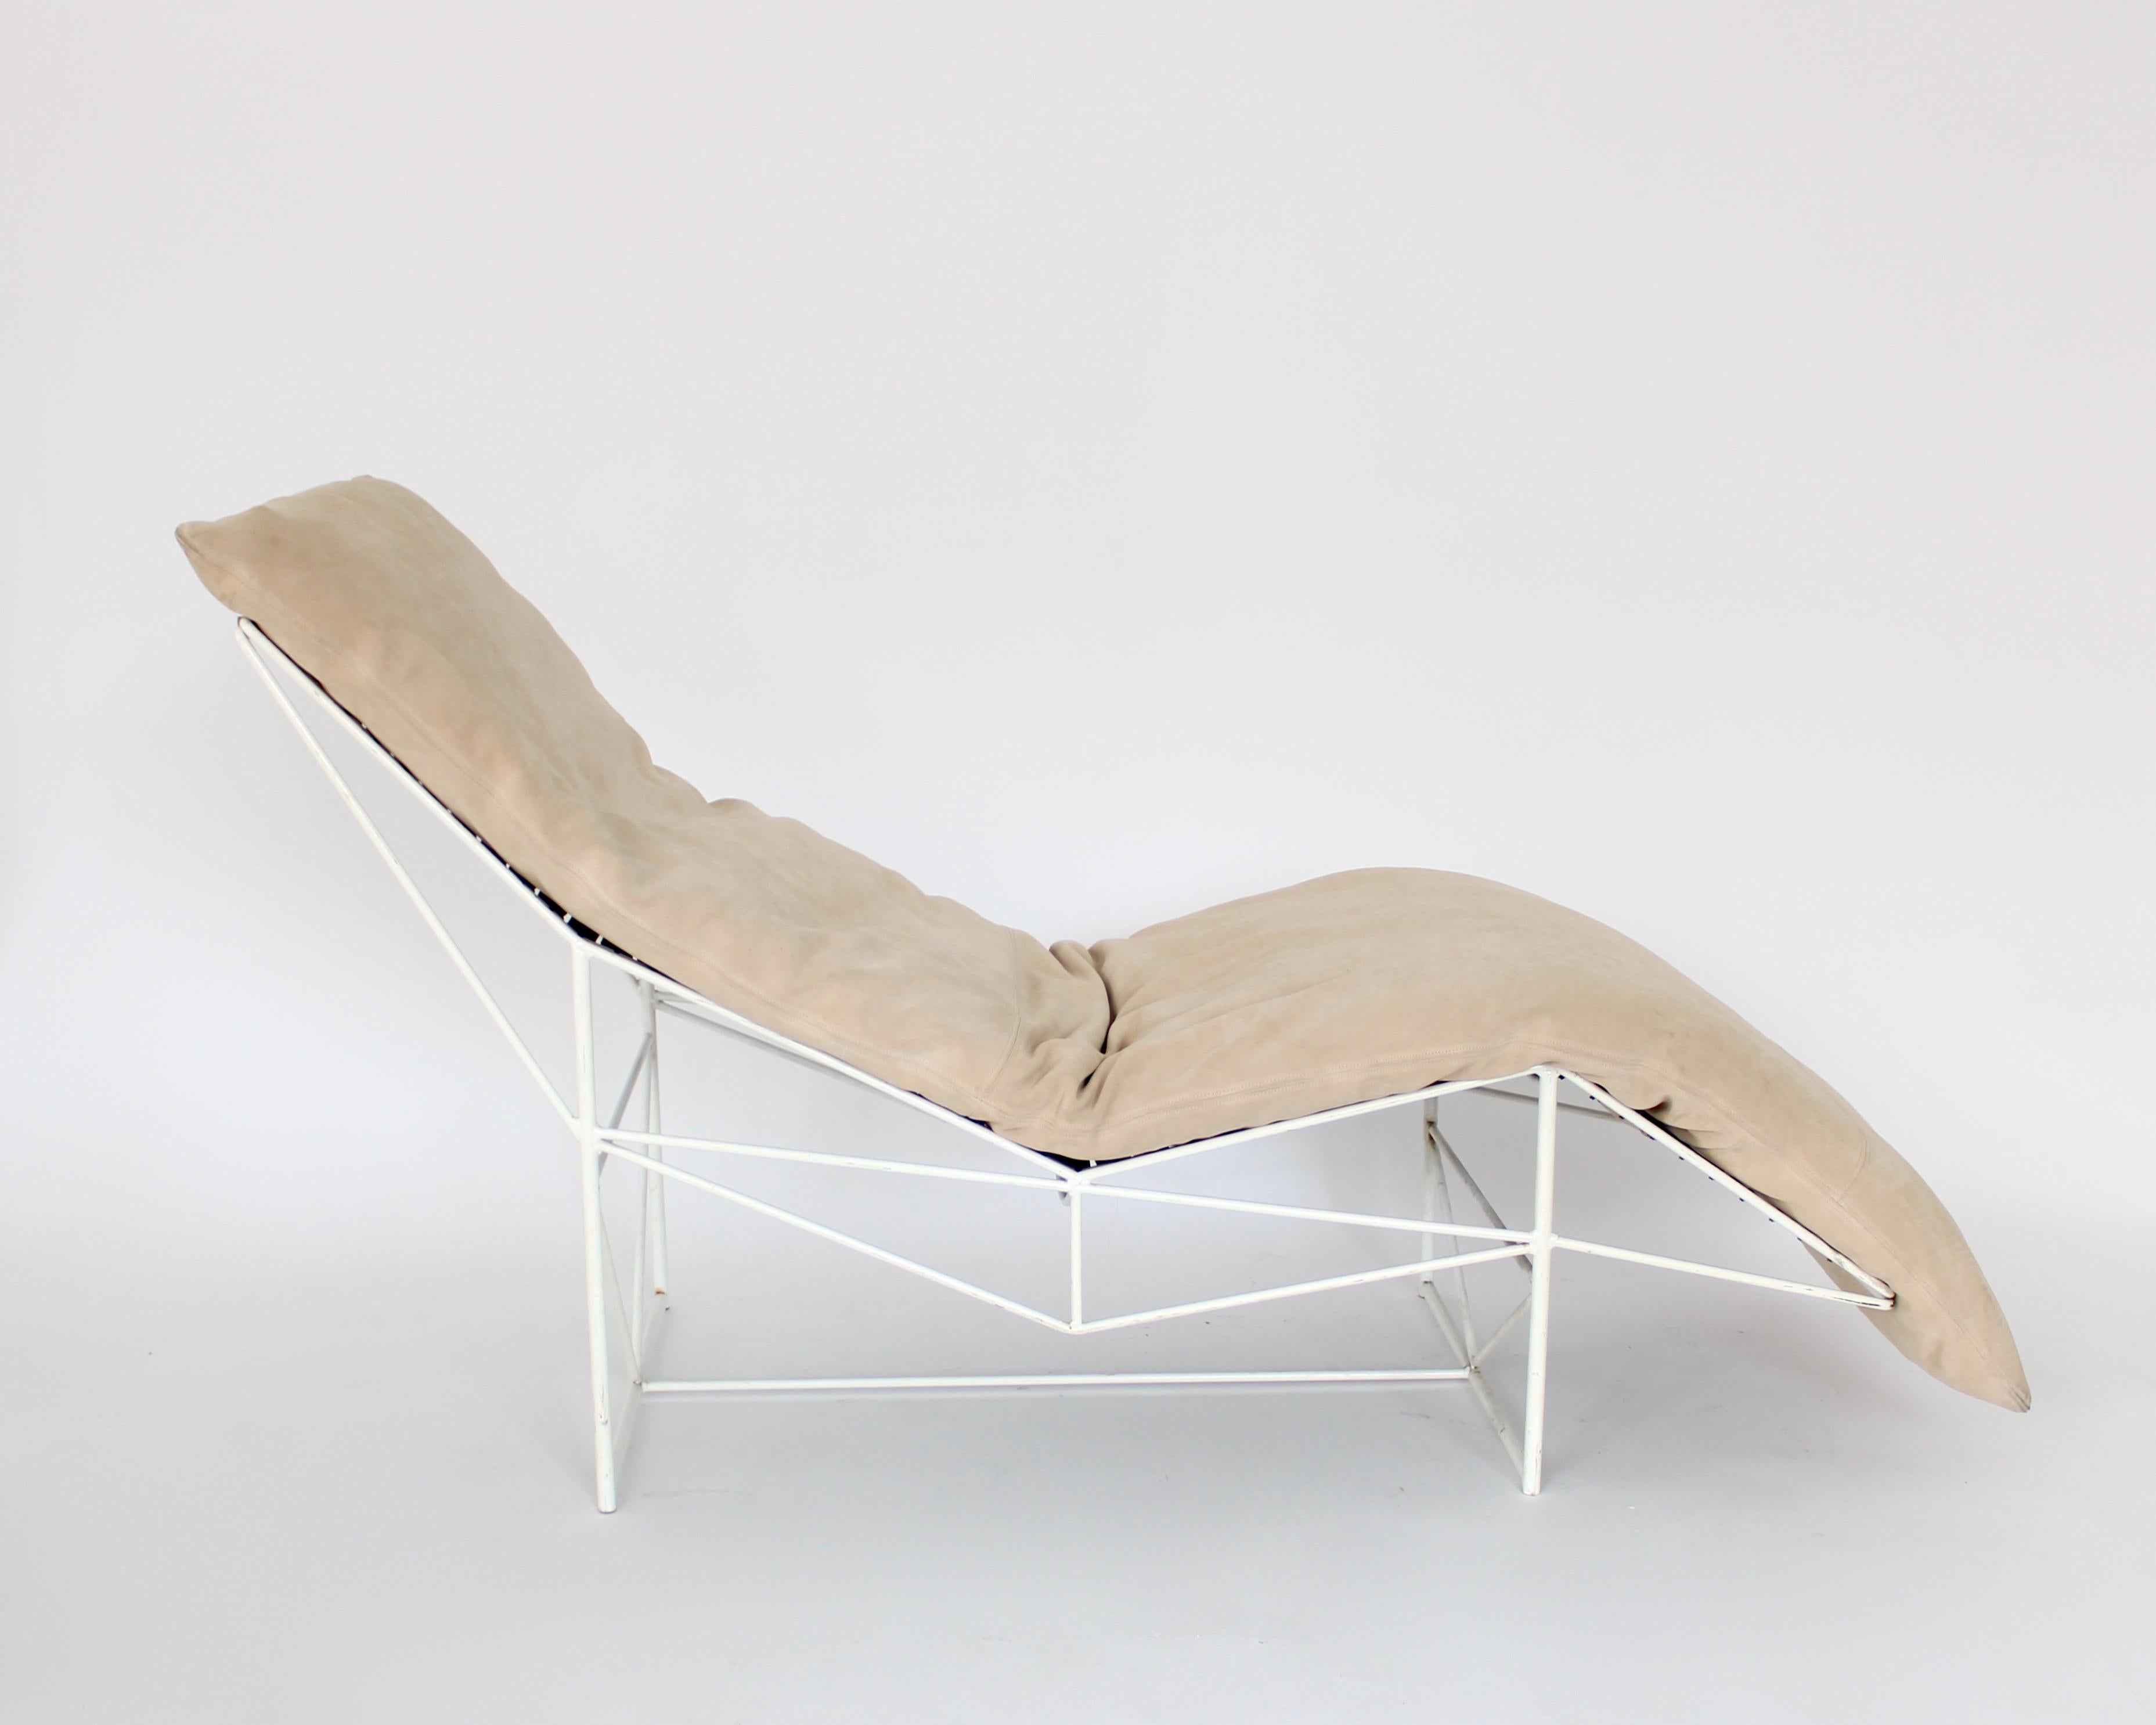 Italian mid-century chaise lounge by Paolo Passerini for Uvet Dimensione, 1980s Chaise lounge in cream tan suede with feather padding and white painted iron rod frame. Produced by Uvet Dimensione in 1980s and designed by Paolo Passerini.